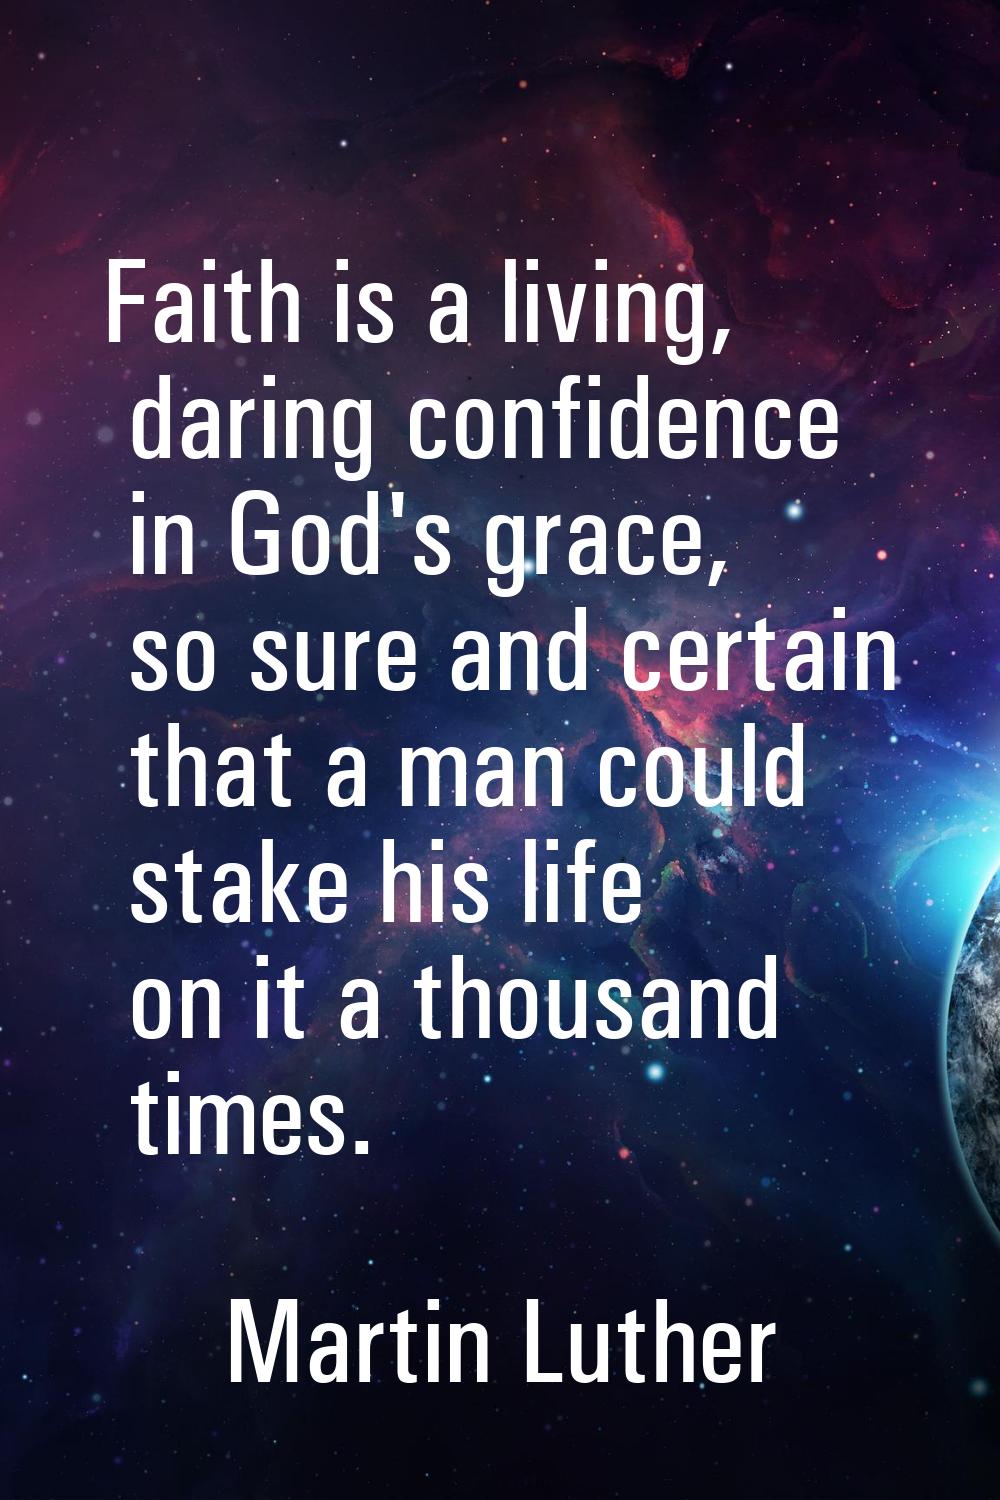 Faith is a living, daring confidence in God's grace, so sure and certain that a man could stake his